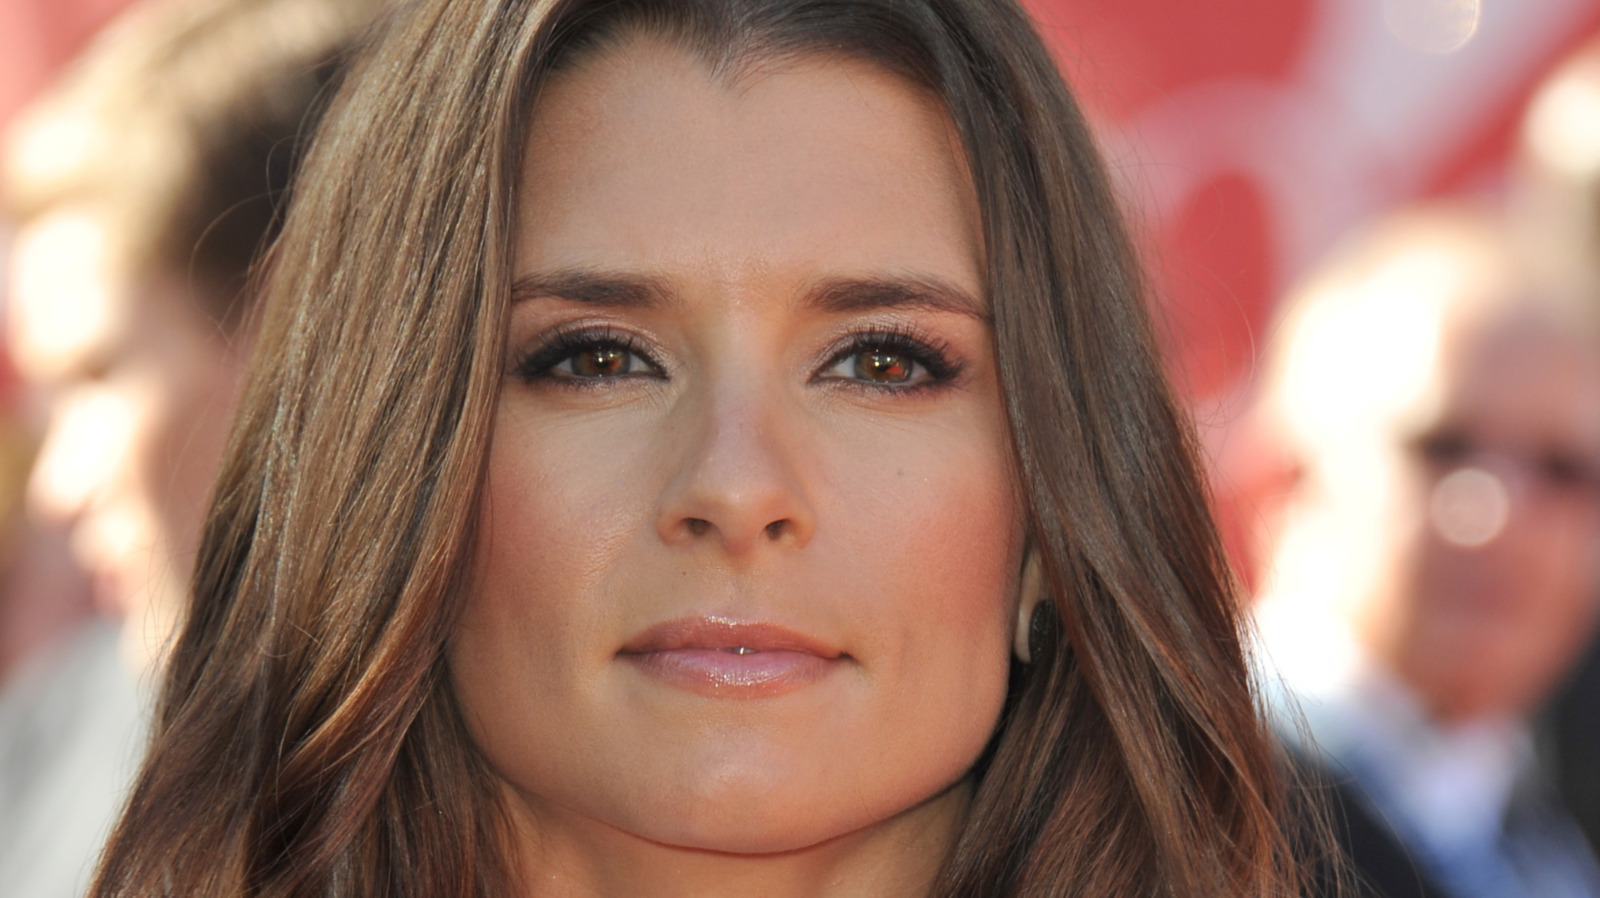 Danica Patrick Opens Up About Her Hard Breakups